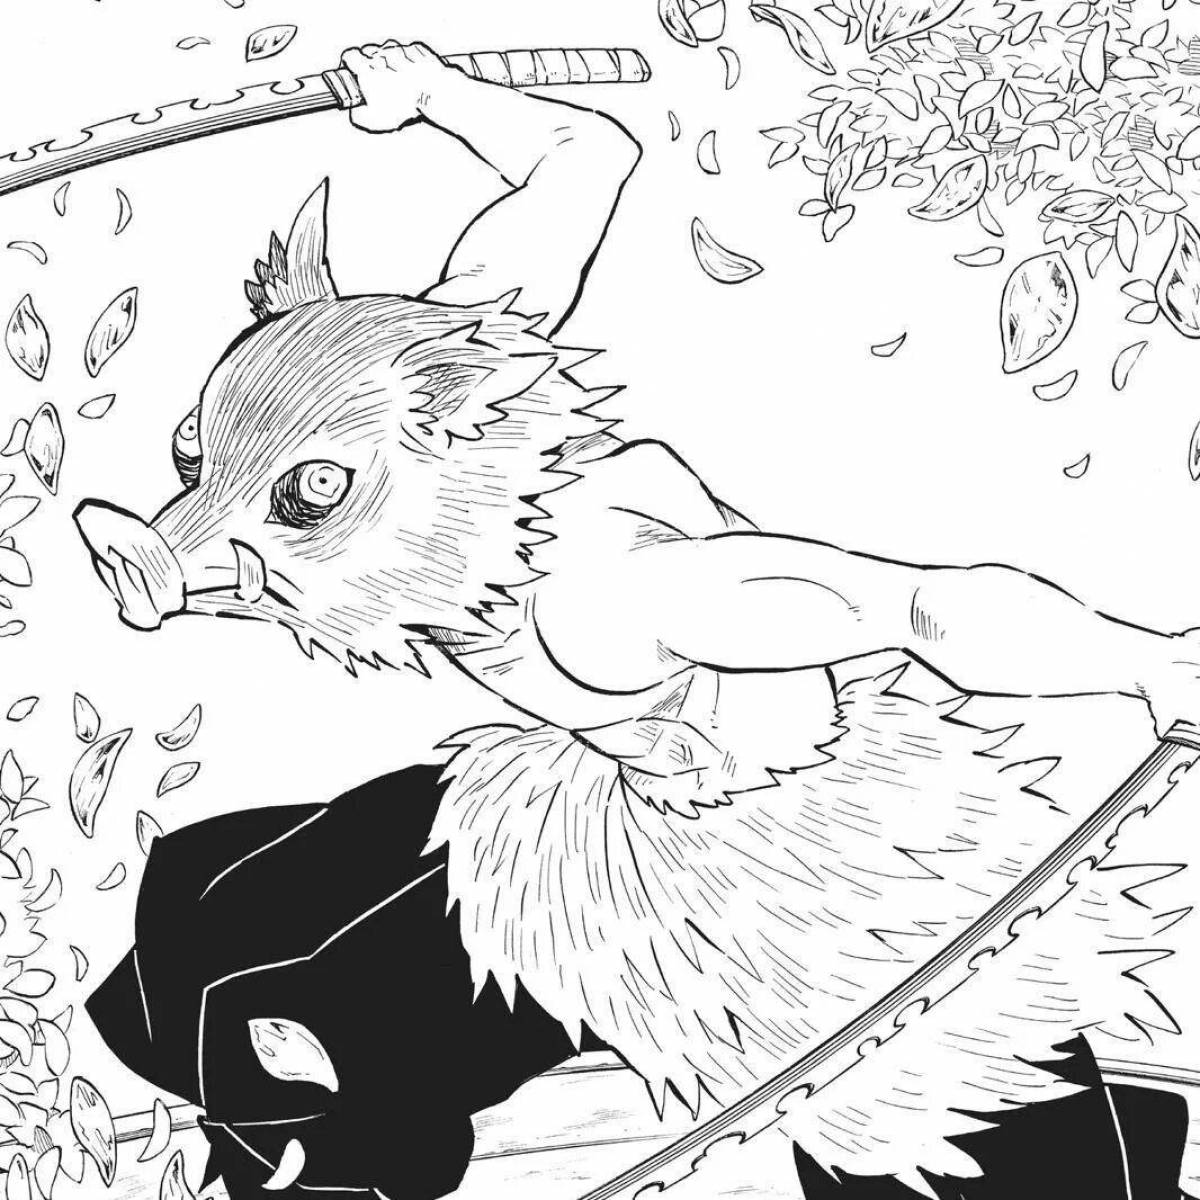 Majestic coloring page blade that cuts demons manga